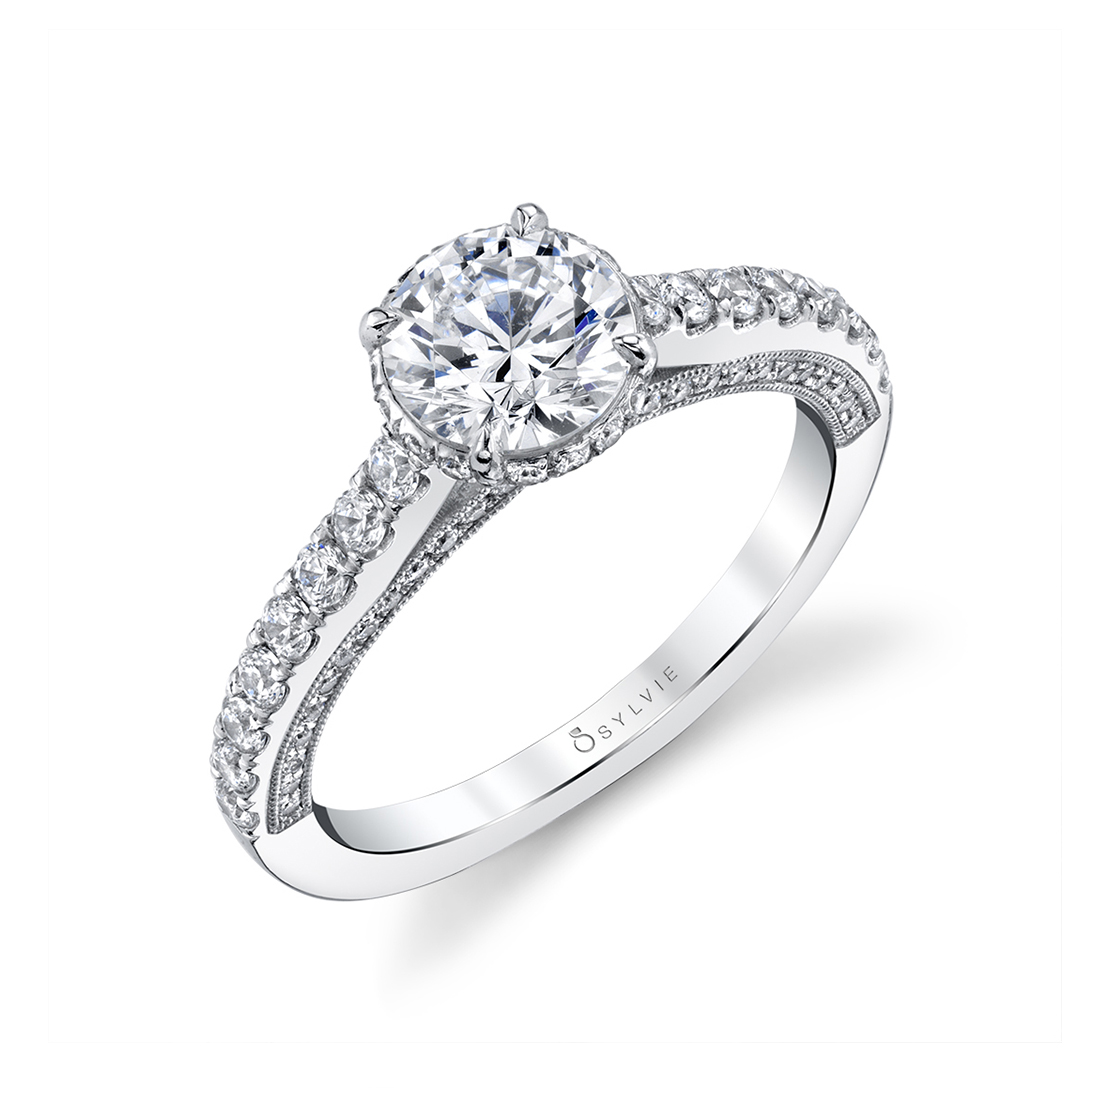 Hidden Halo Engagement Ring in white gold - Marianna